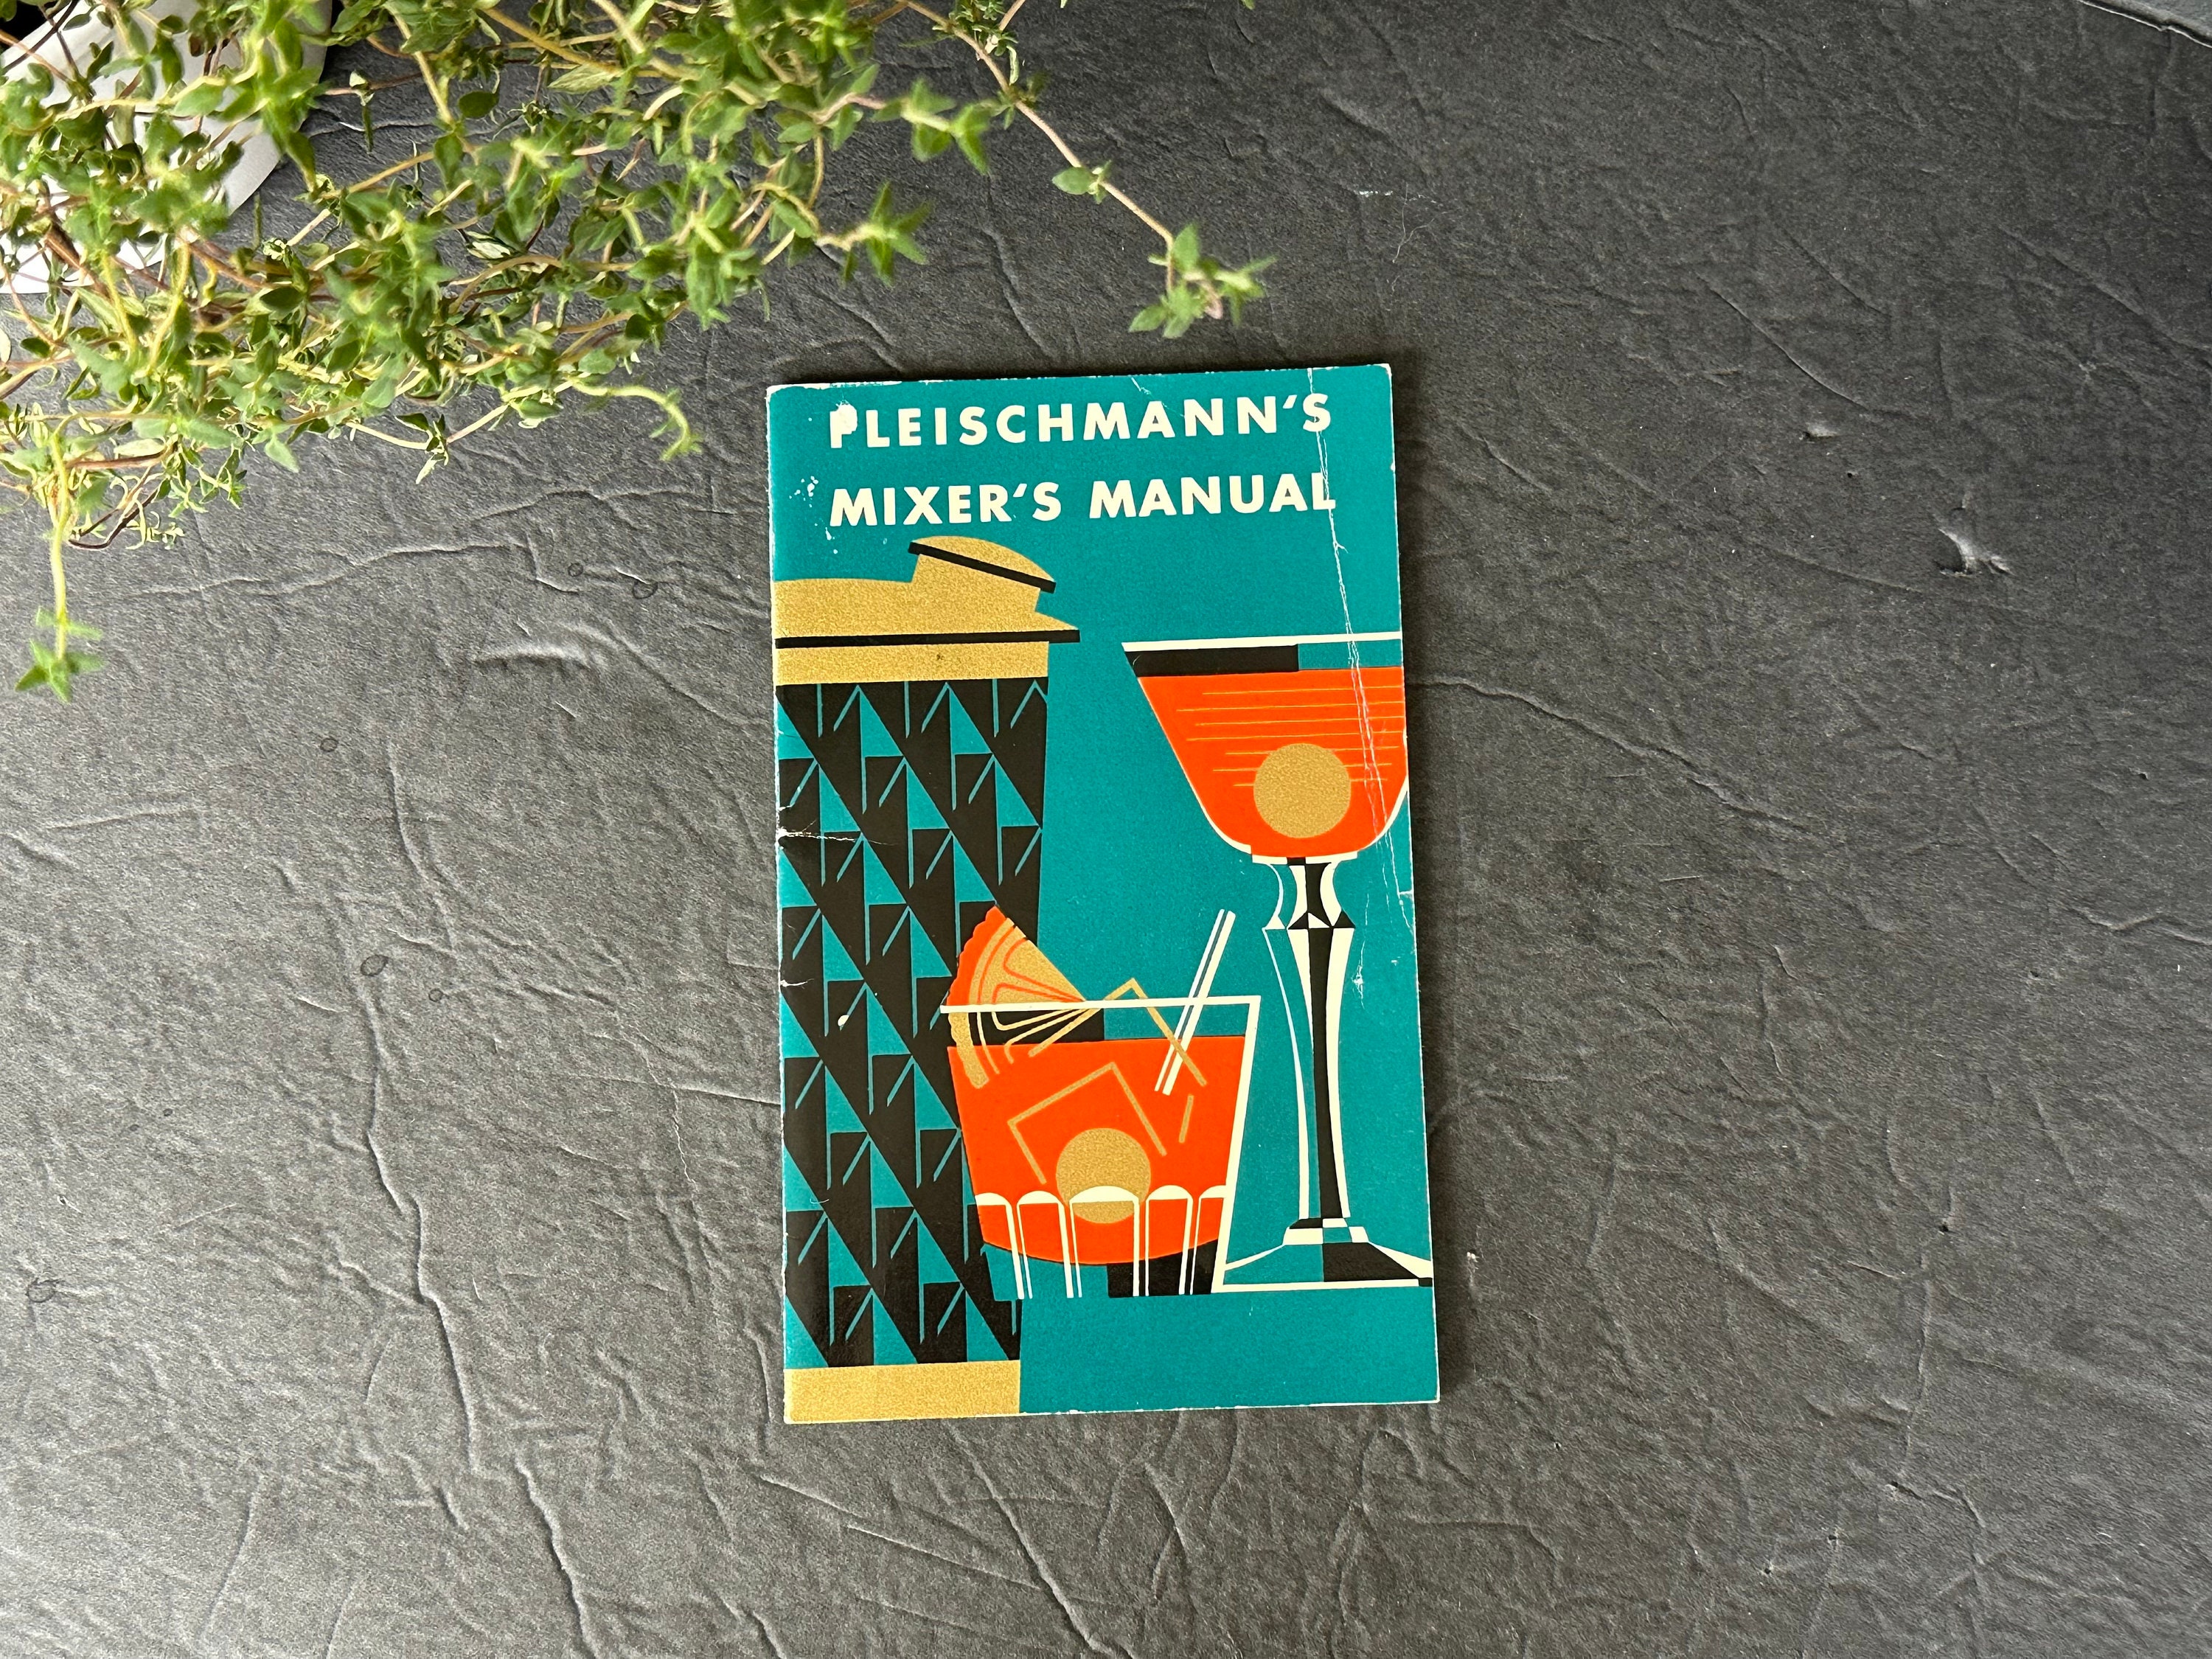 Personalised Pocket Cocktail Book 